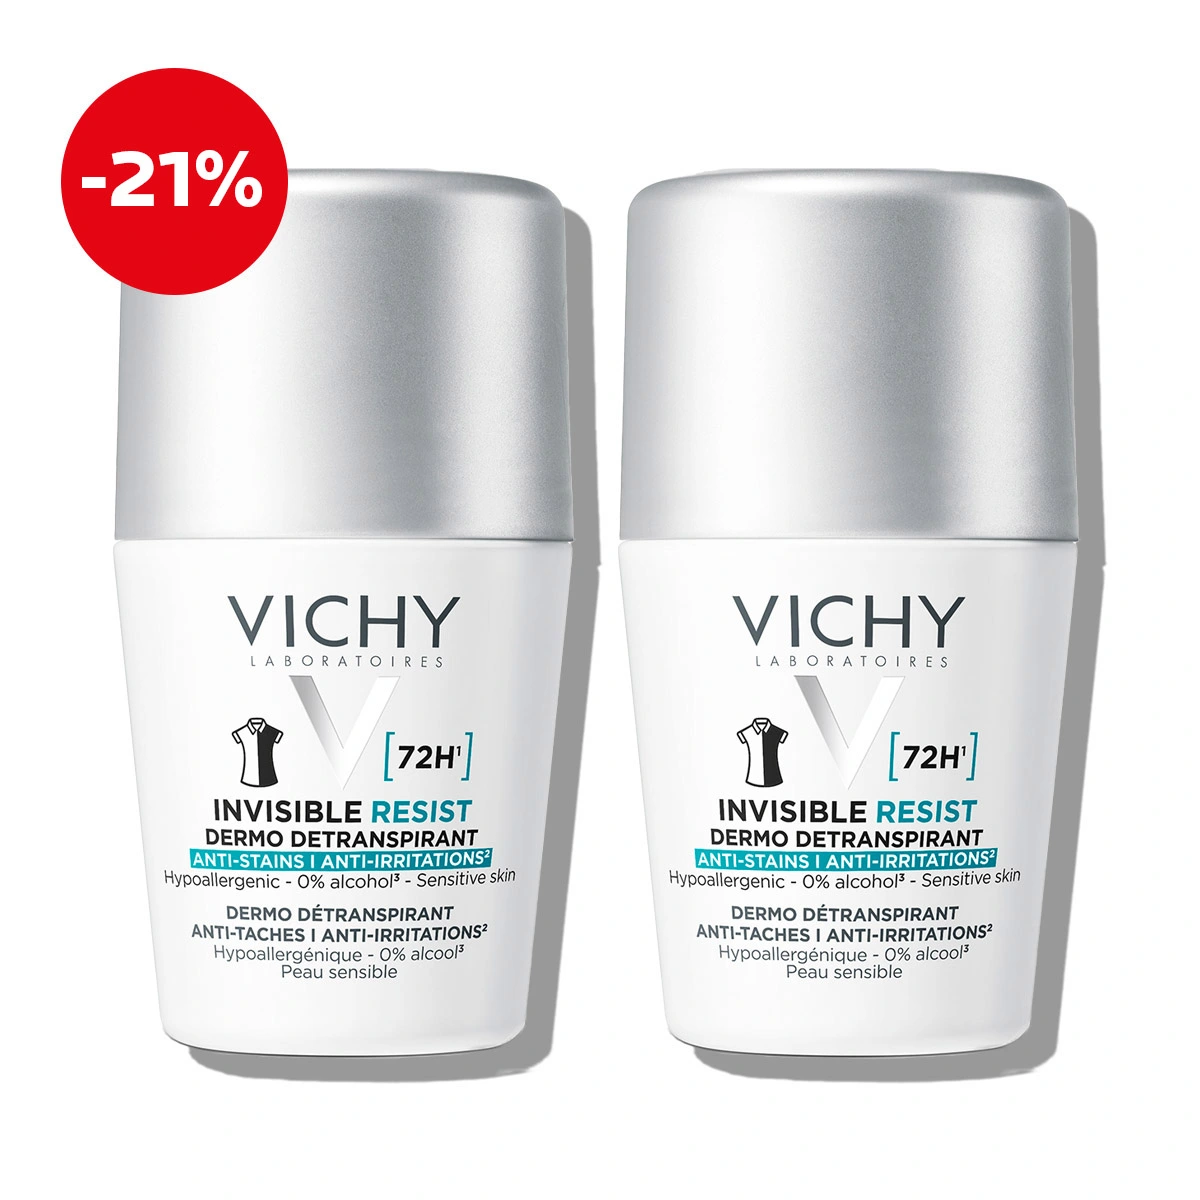 Vichy-Deo-Duo-pack_-Antiperspirant-roll-on-for-protection-against-sweating-for-up-to-72-hours-_1__1